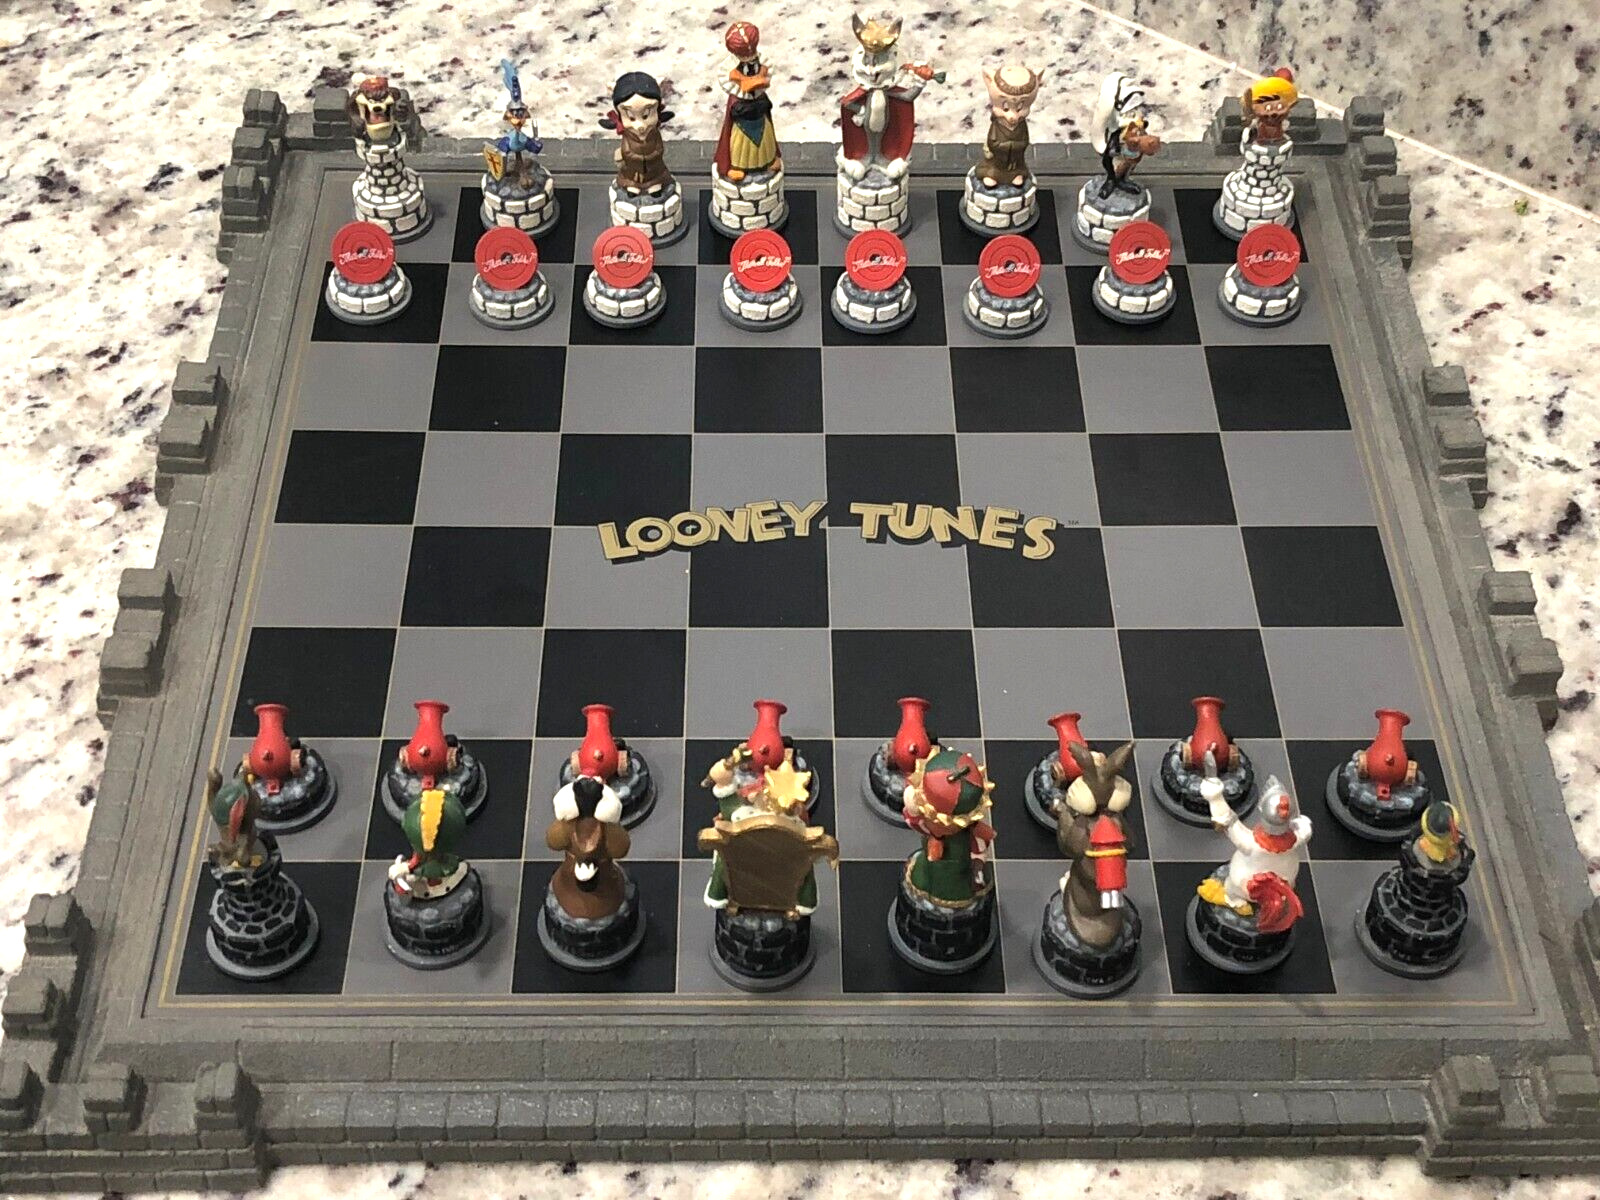 Rare 1990’s Franklin Mint “Looney Tunes” Chess Set With Character Pieces